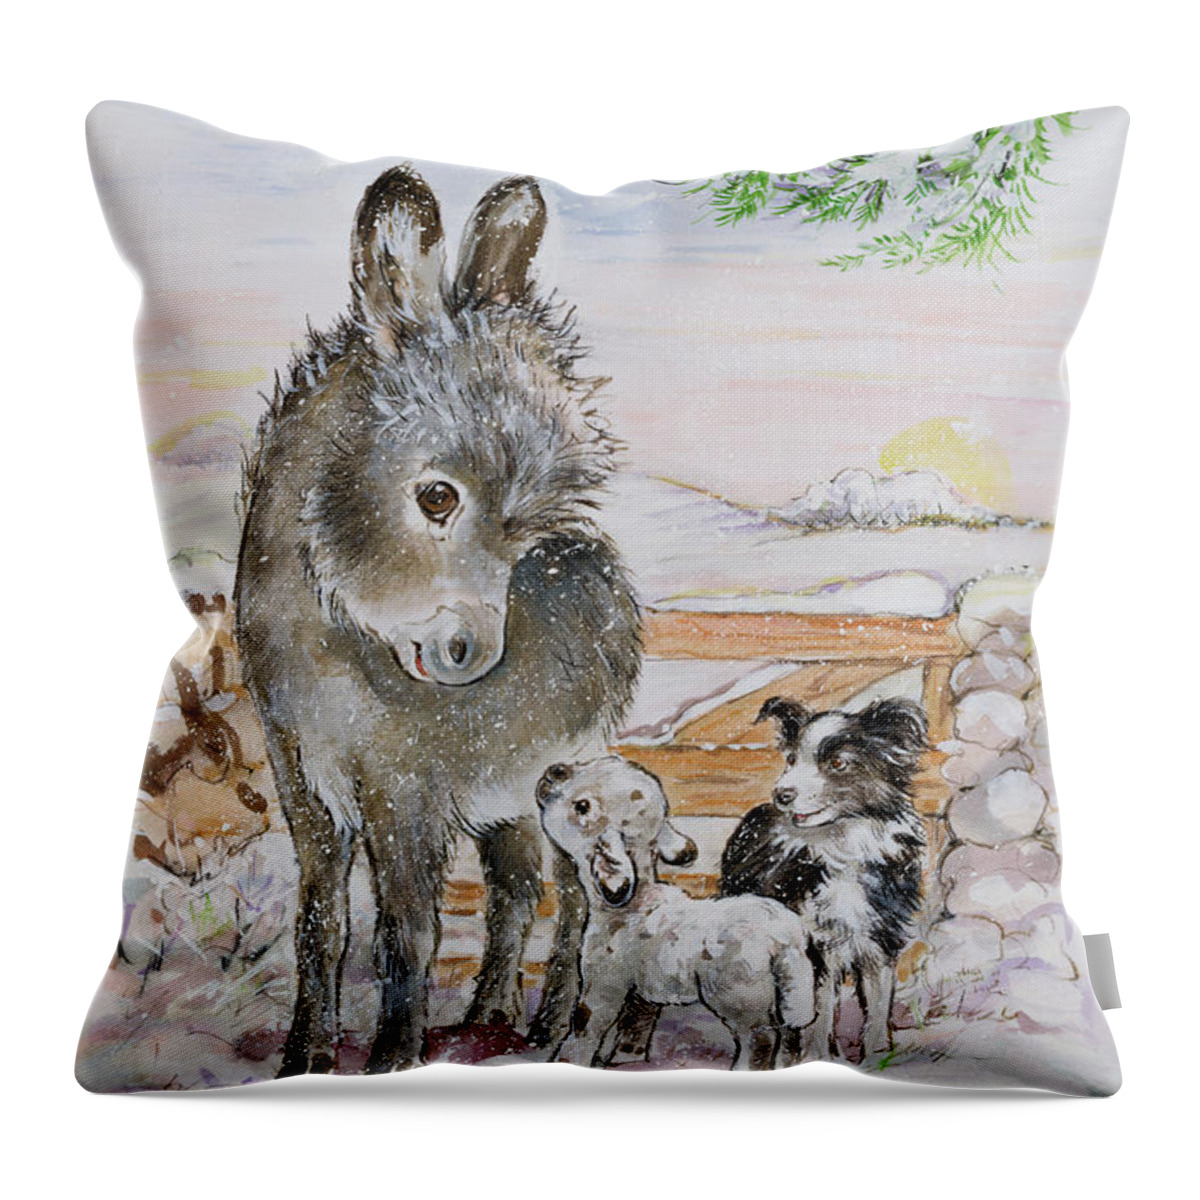 Snow Throw Pillow featuring the painting Best Friends by Diane Matthes